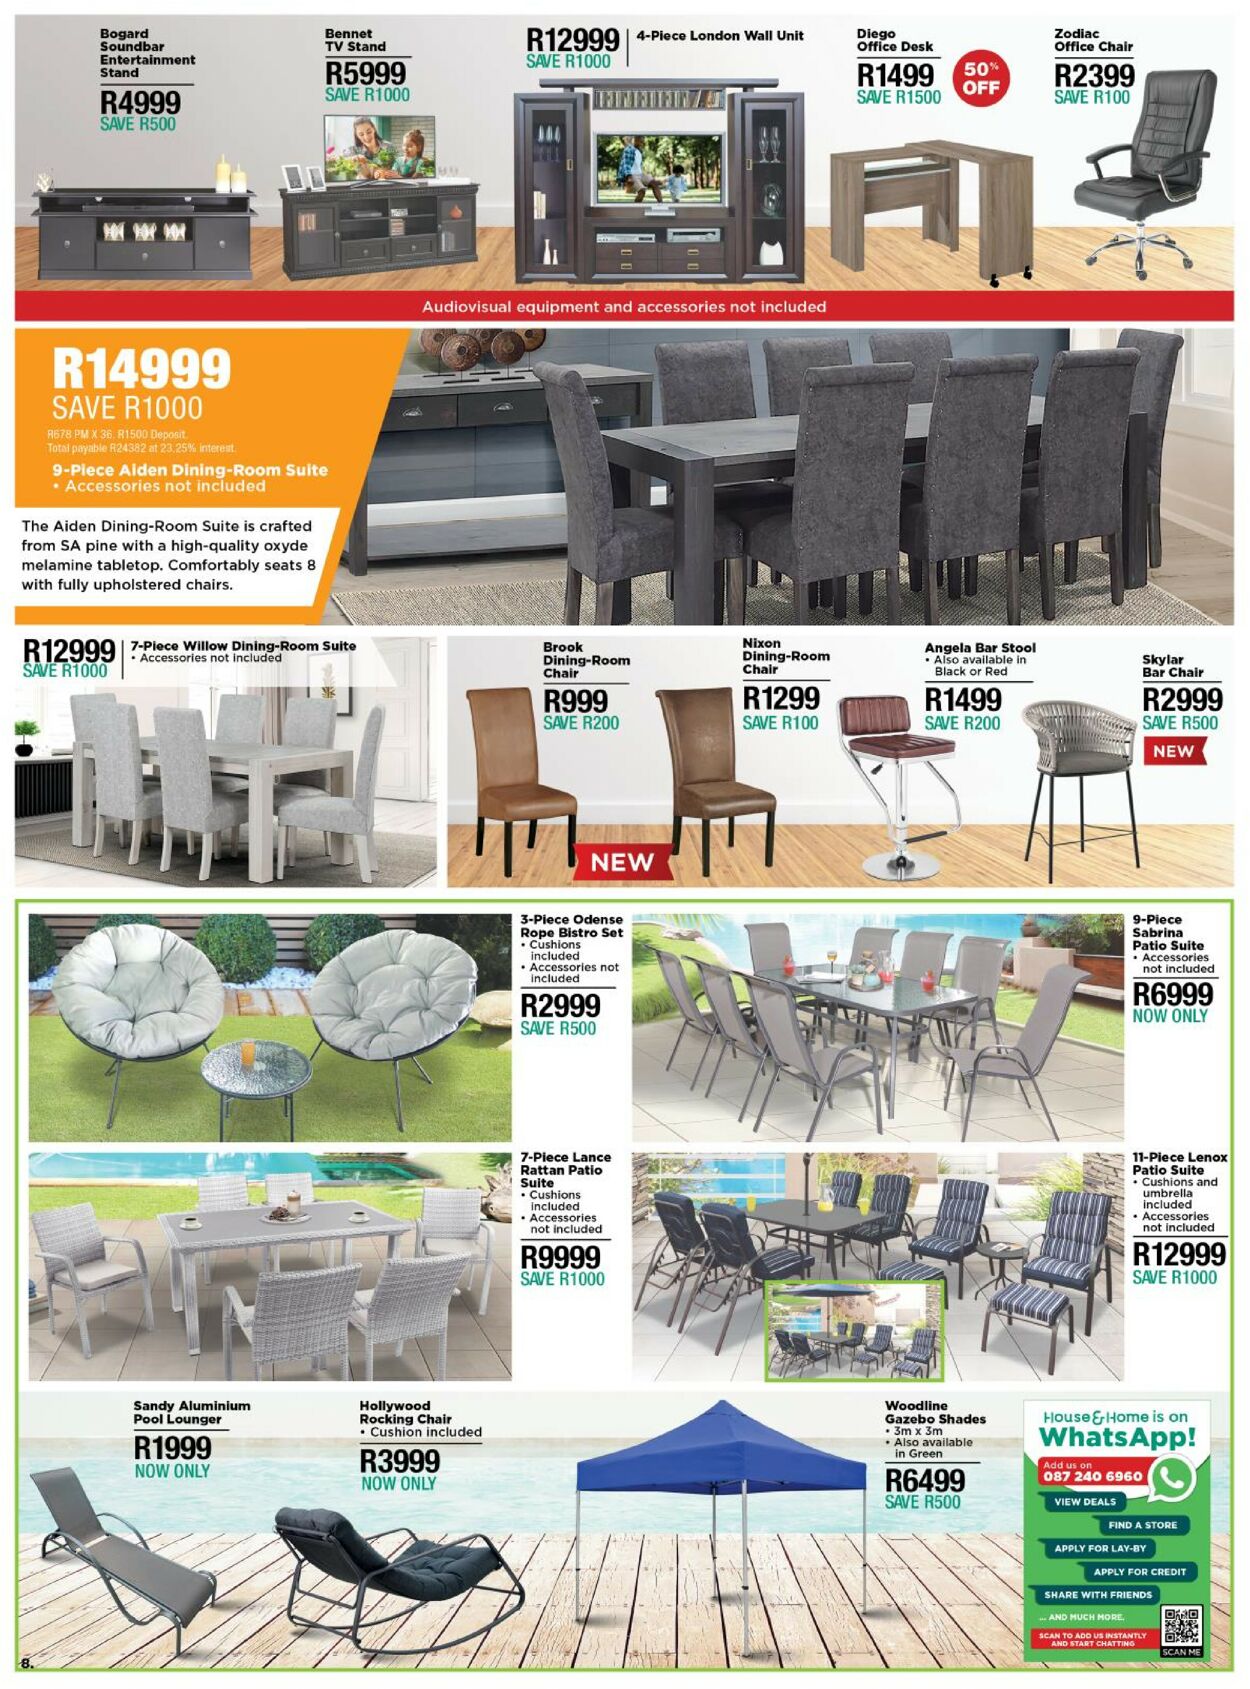 House & Home Catalogue from 2023/03/23